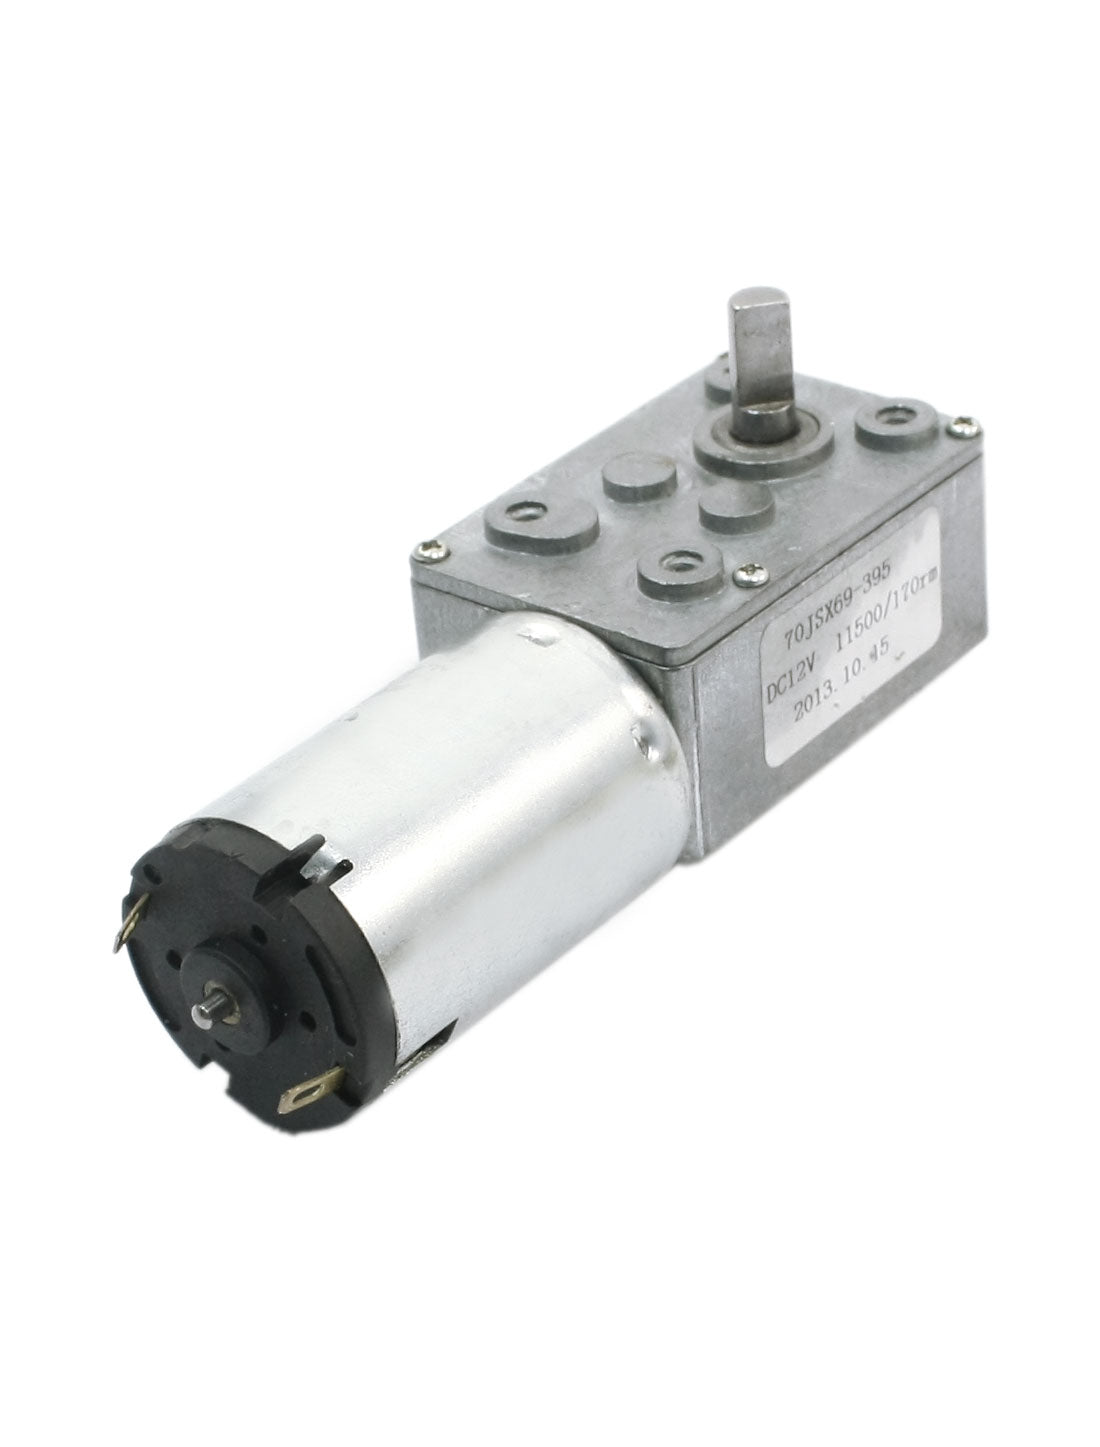 uxcell Uxcell DC 12V Connecting Reduction Ratio 11500RPM/170RPM Rotary Speed Reducer High Torque Worm Geared Box Motor